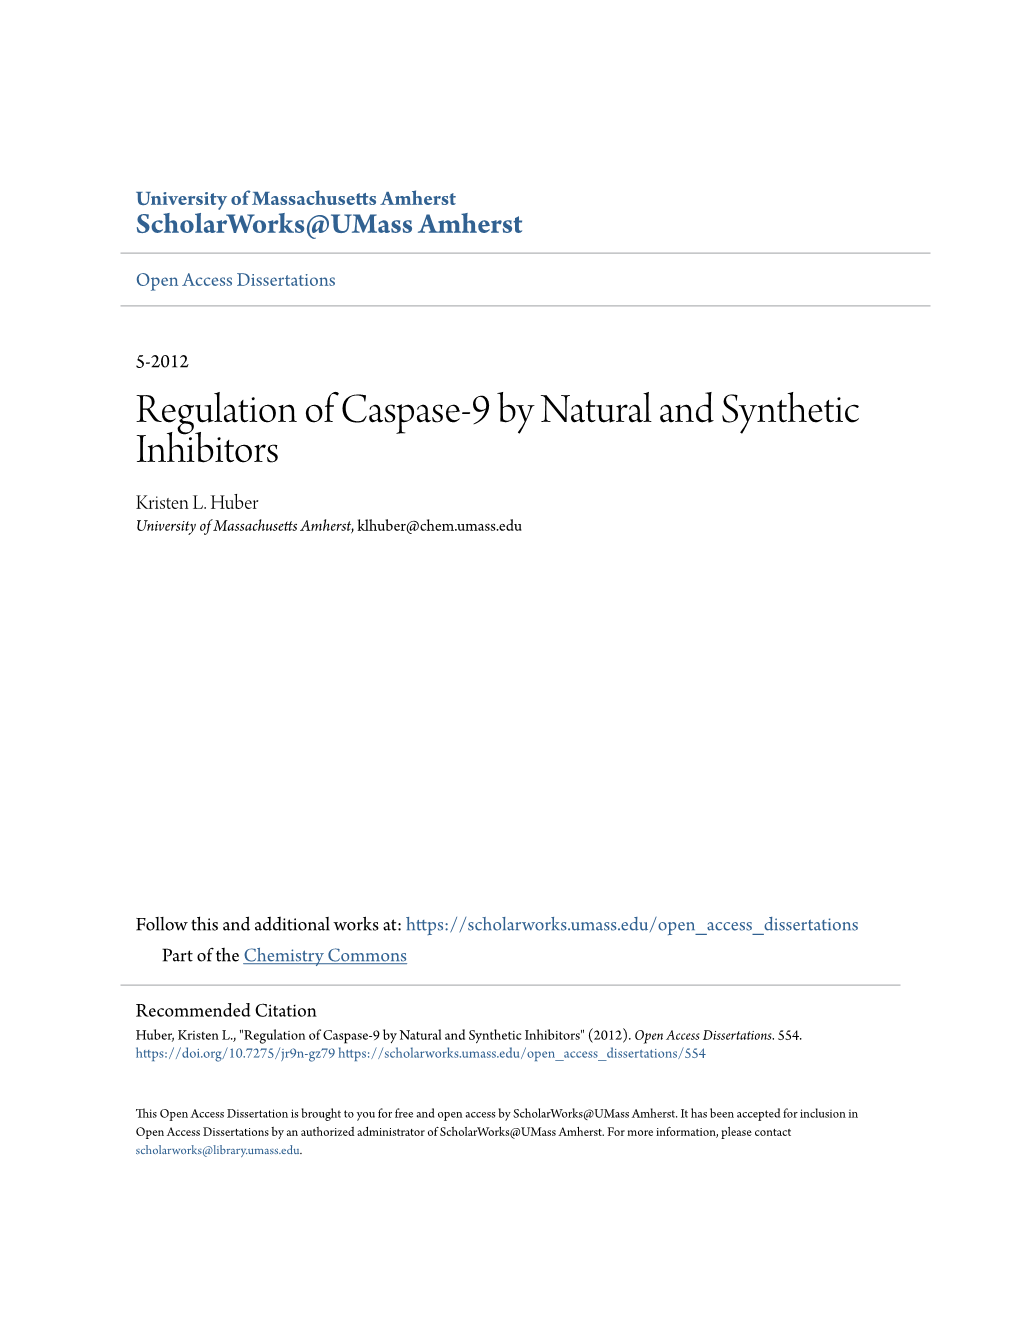 Regulation of Caspase-9 by Natural and Synthetic Inhibitors Kristen L